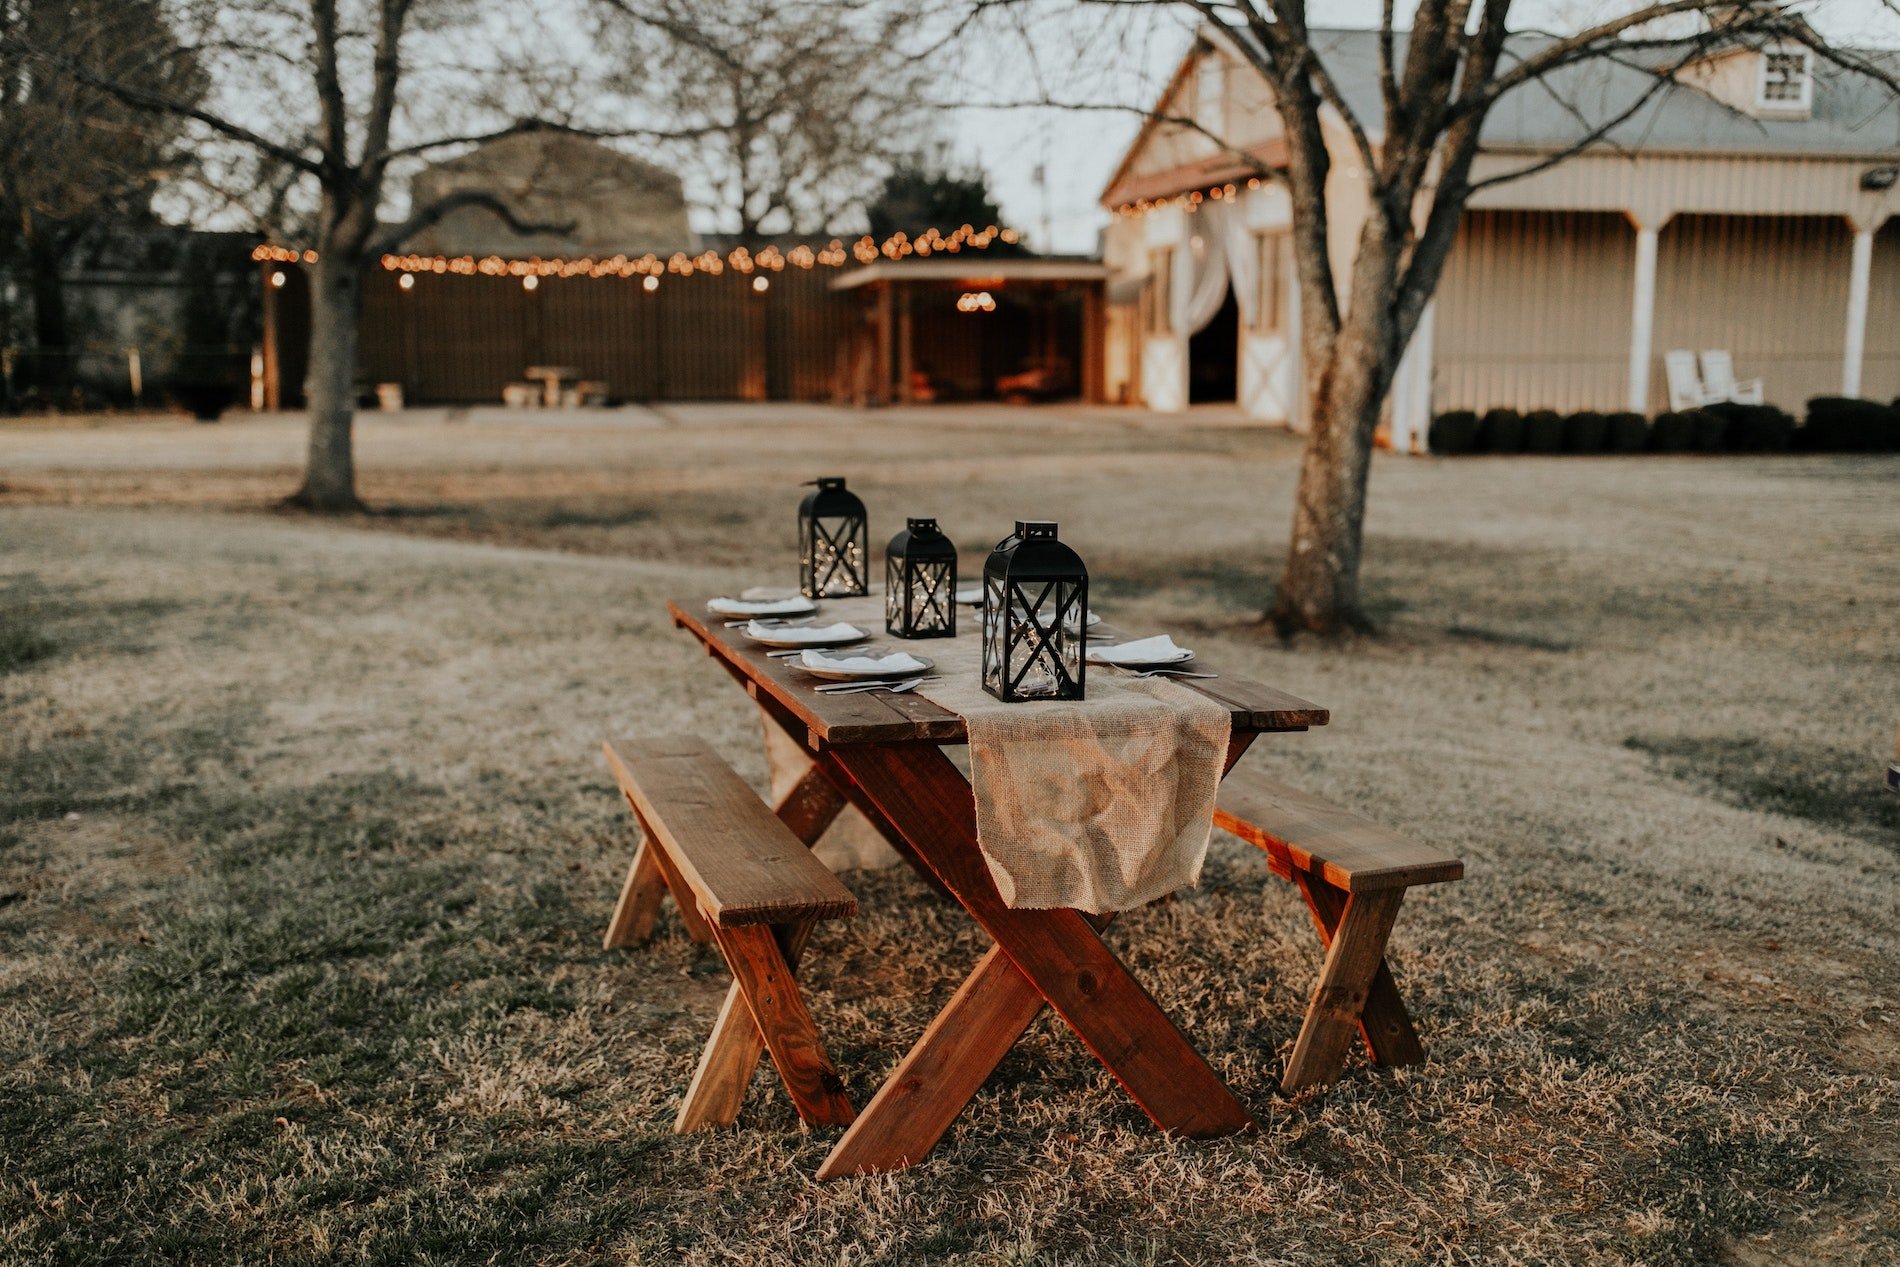 picnic table decorated for outdoor gathering with string lights